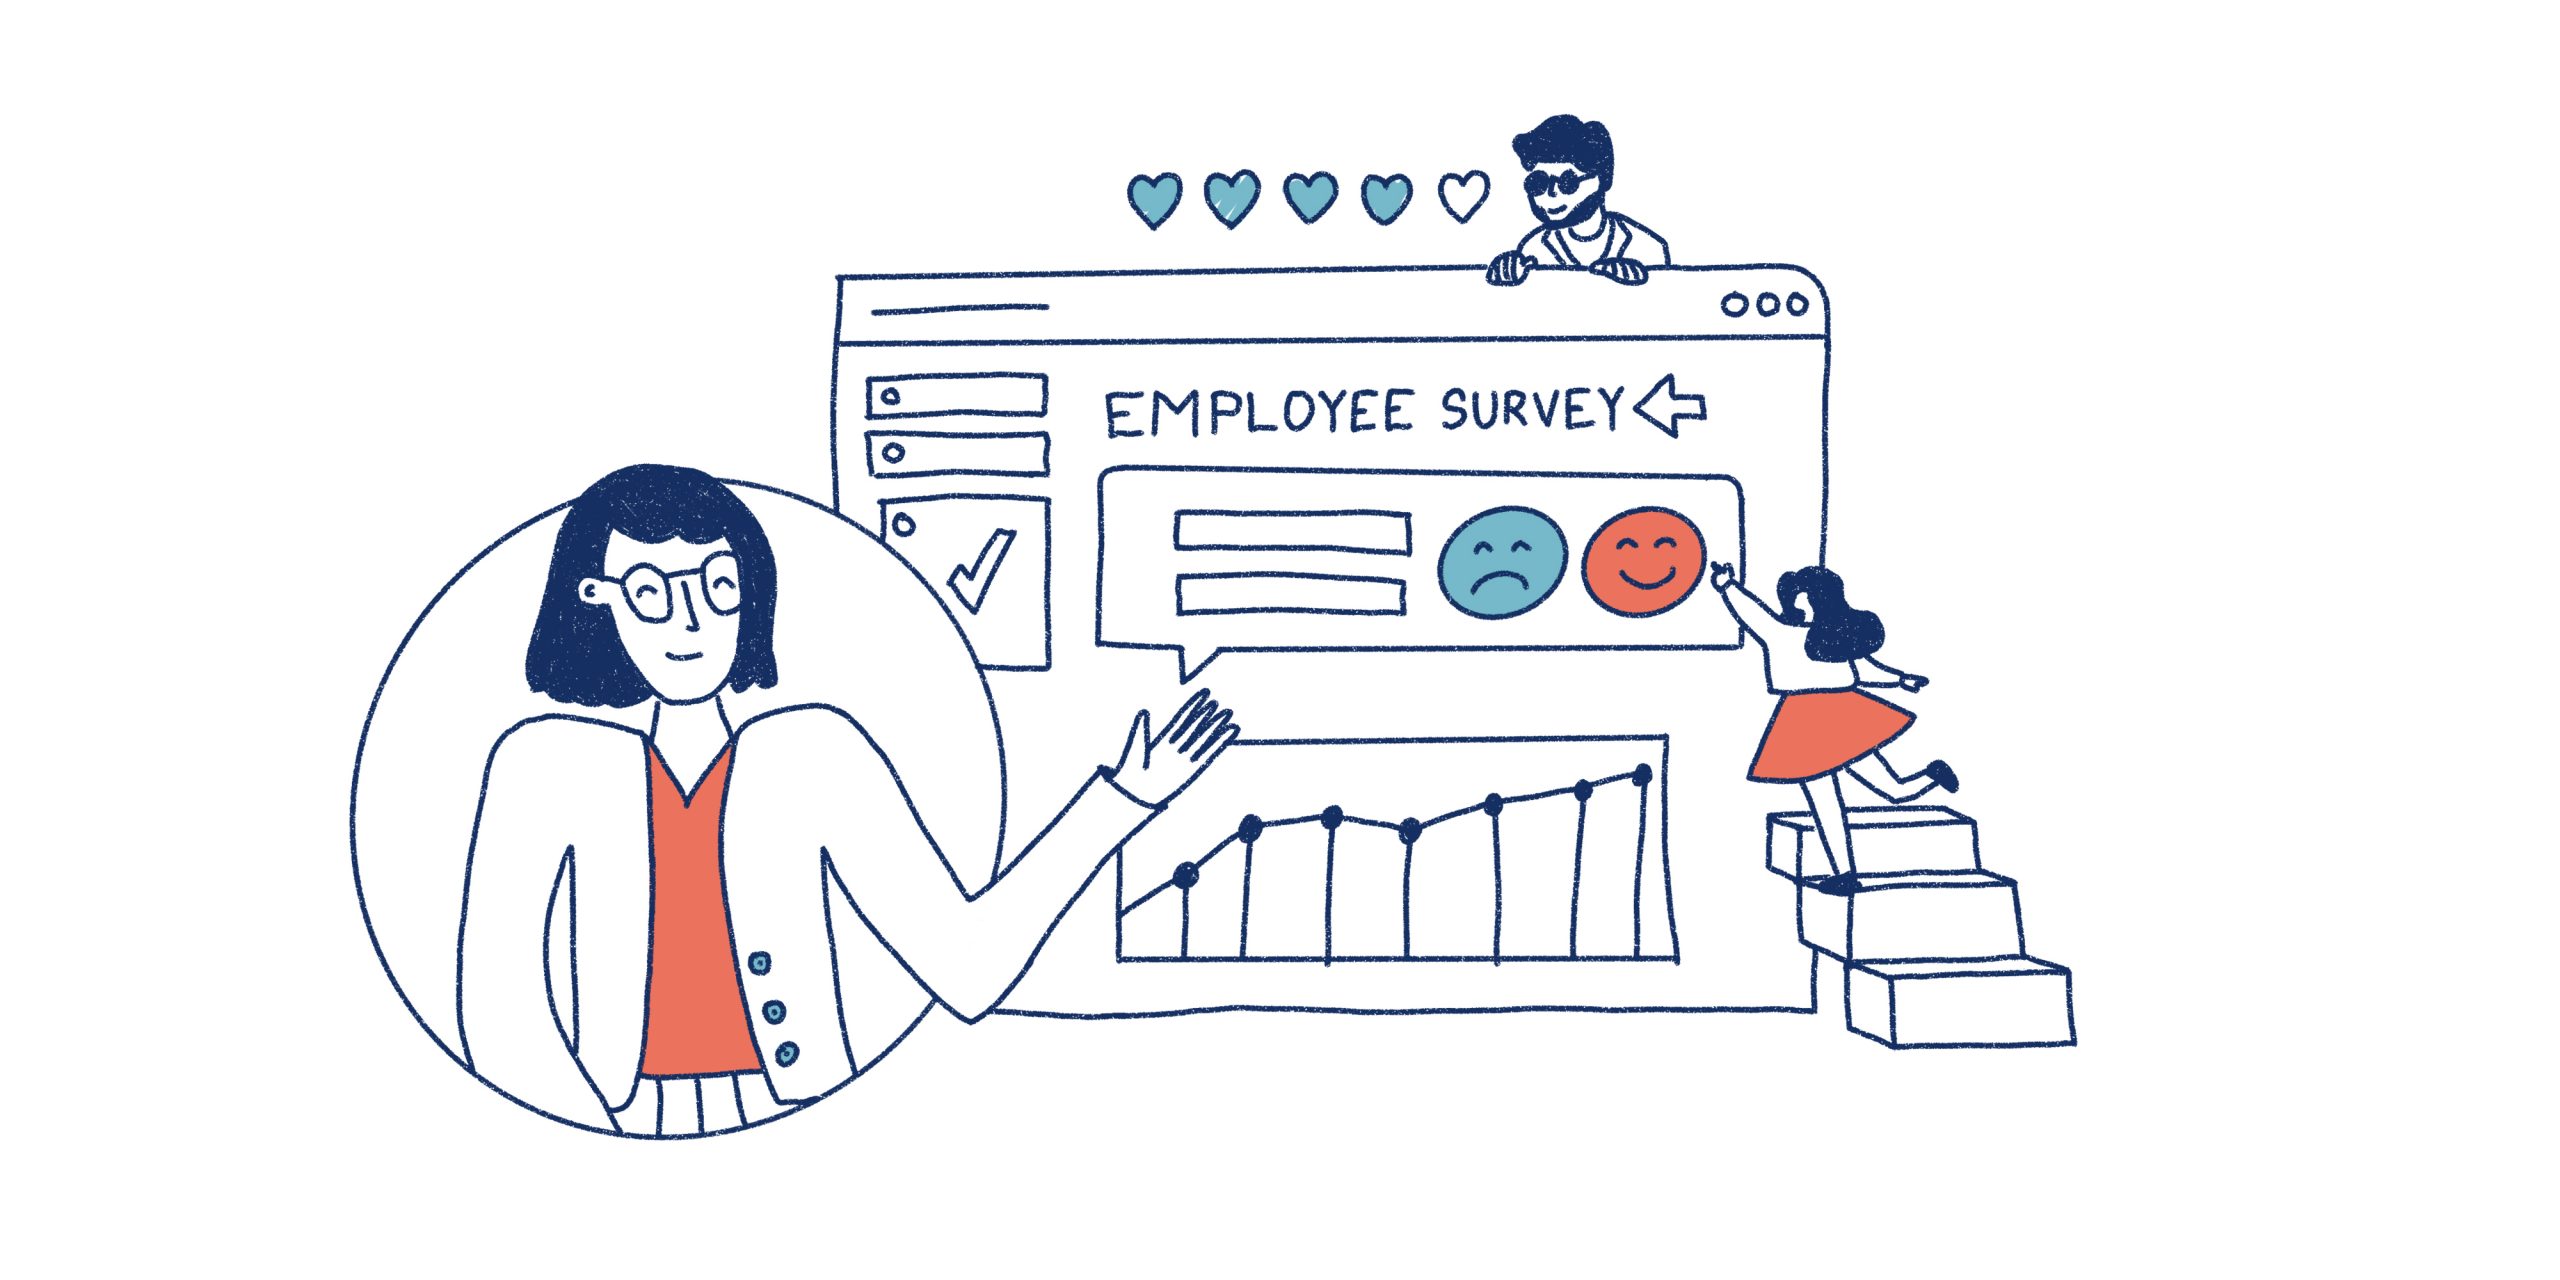 An Employee Benefits Survey Shows Employees You Care (And Can Benefit Your Company, Too)